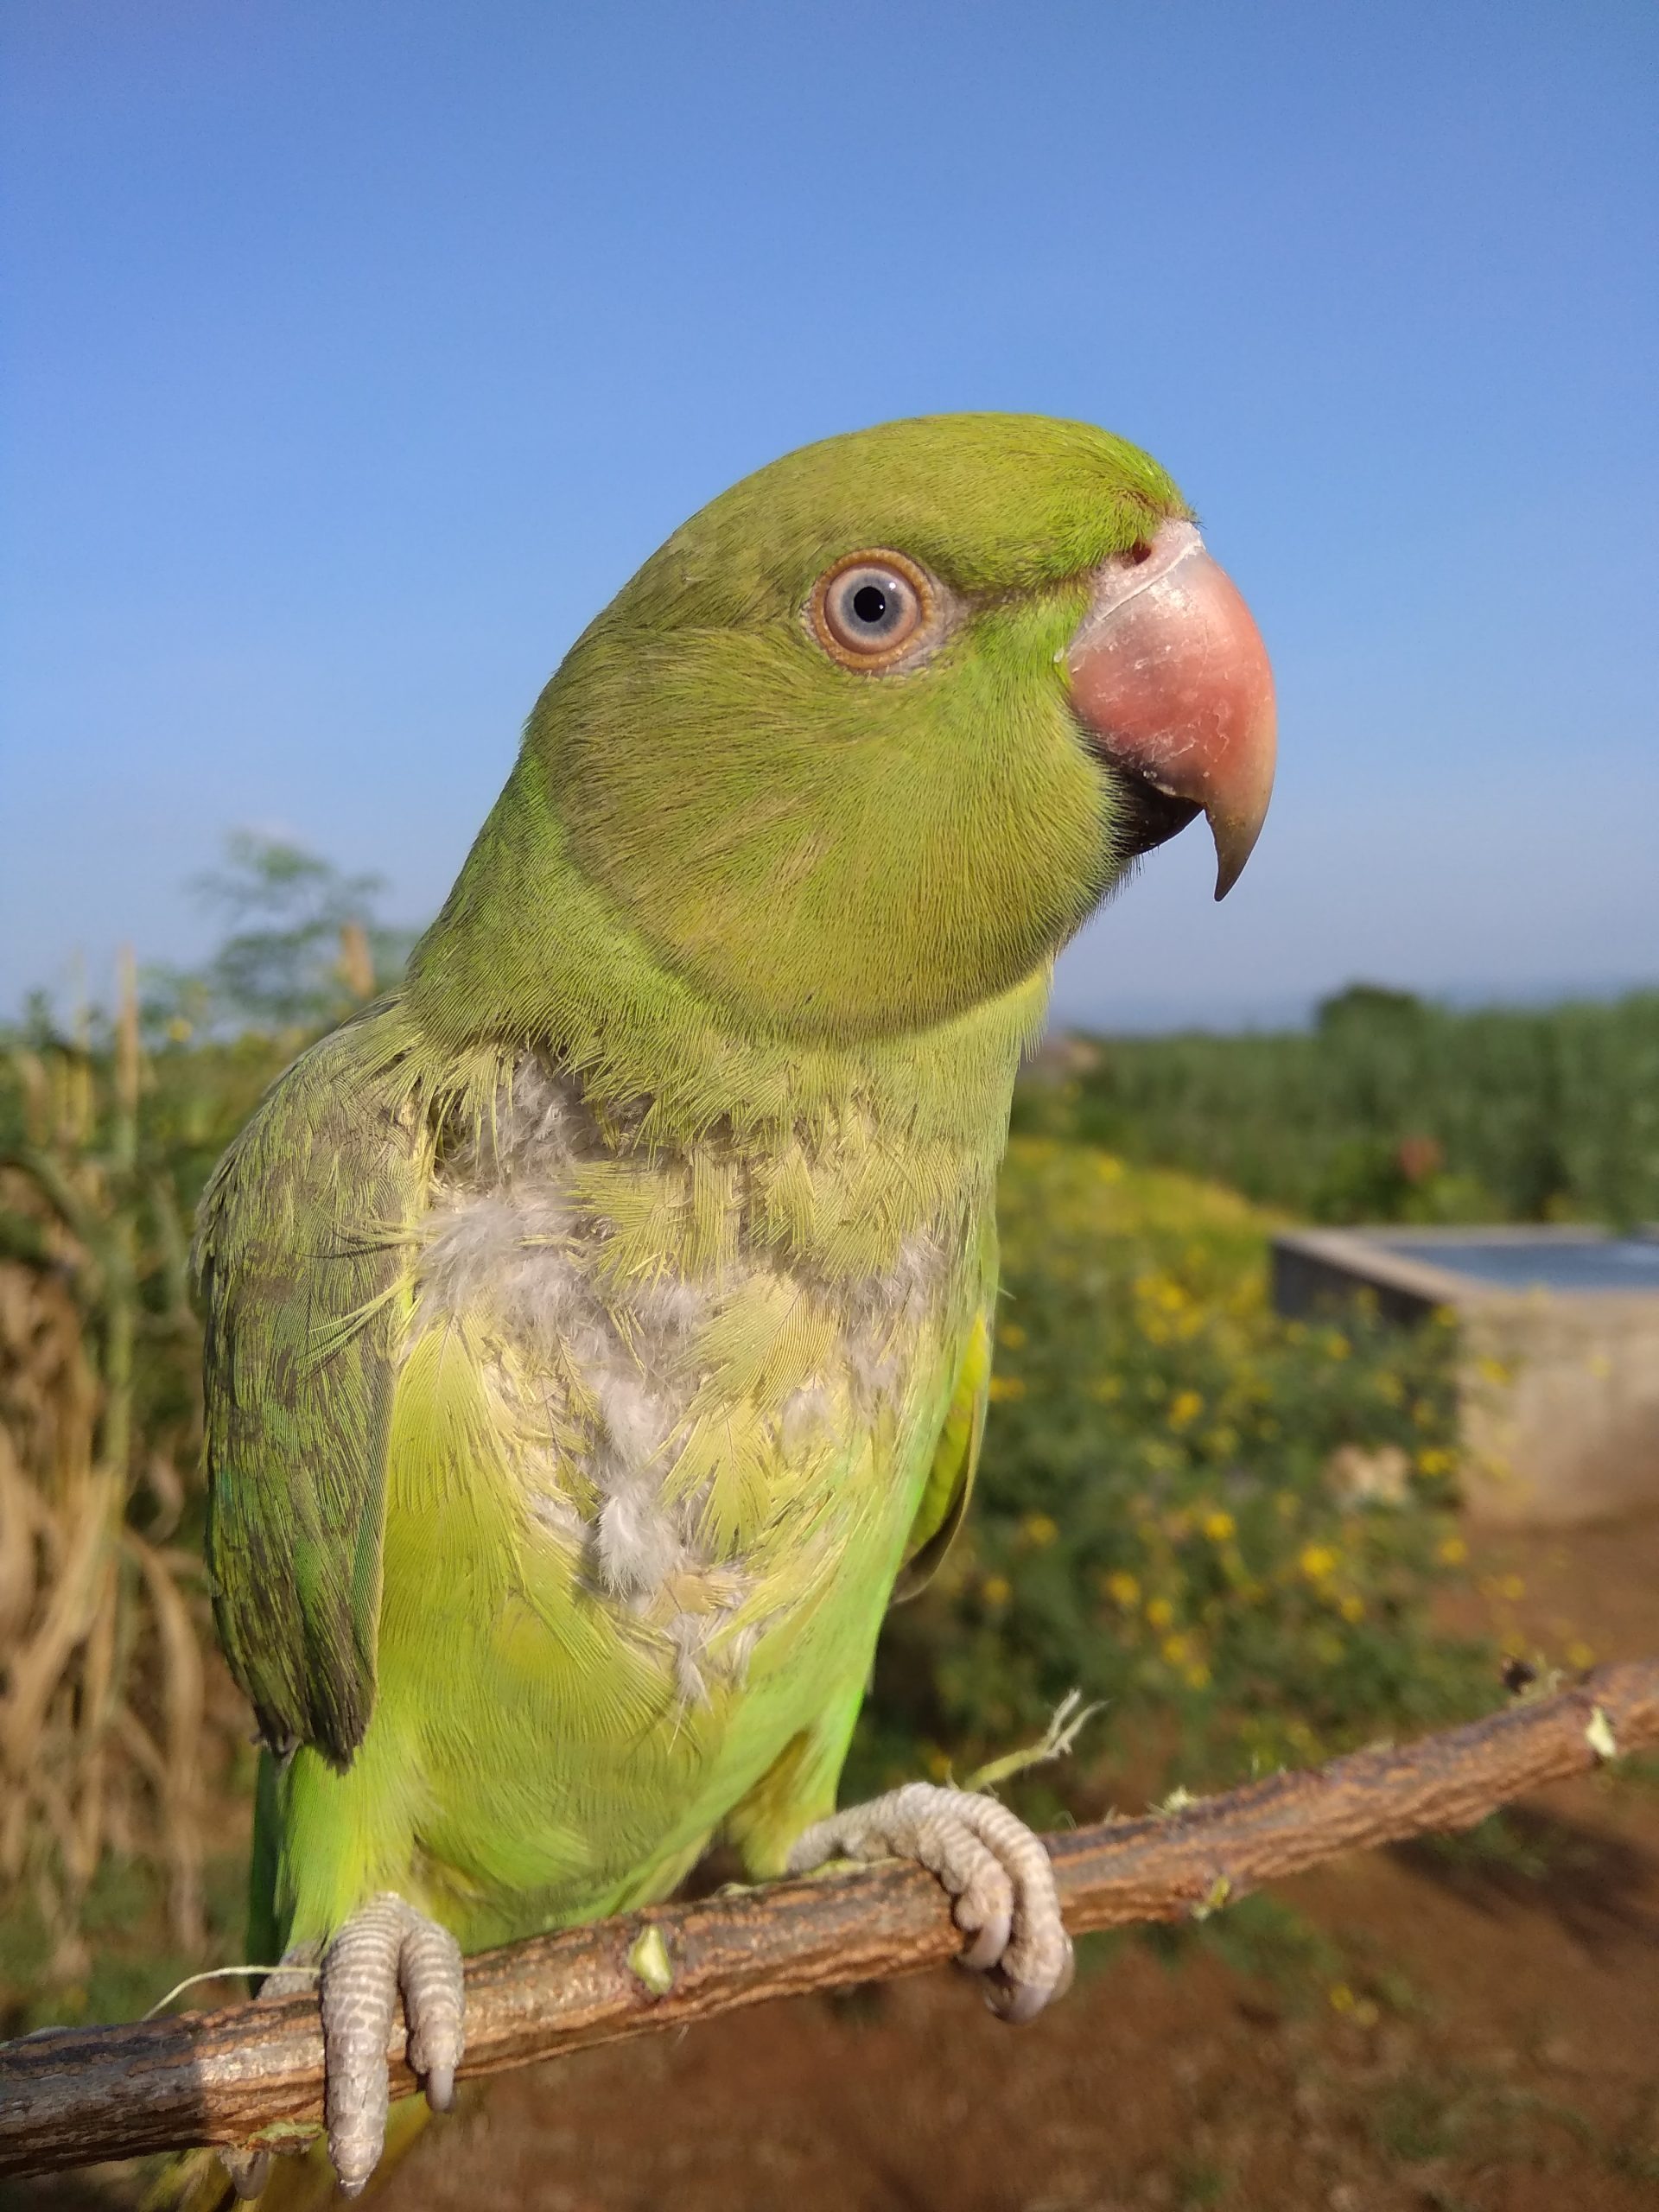 Parrot sitting on plant branch